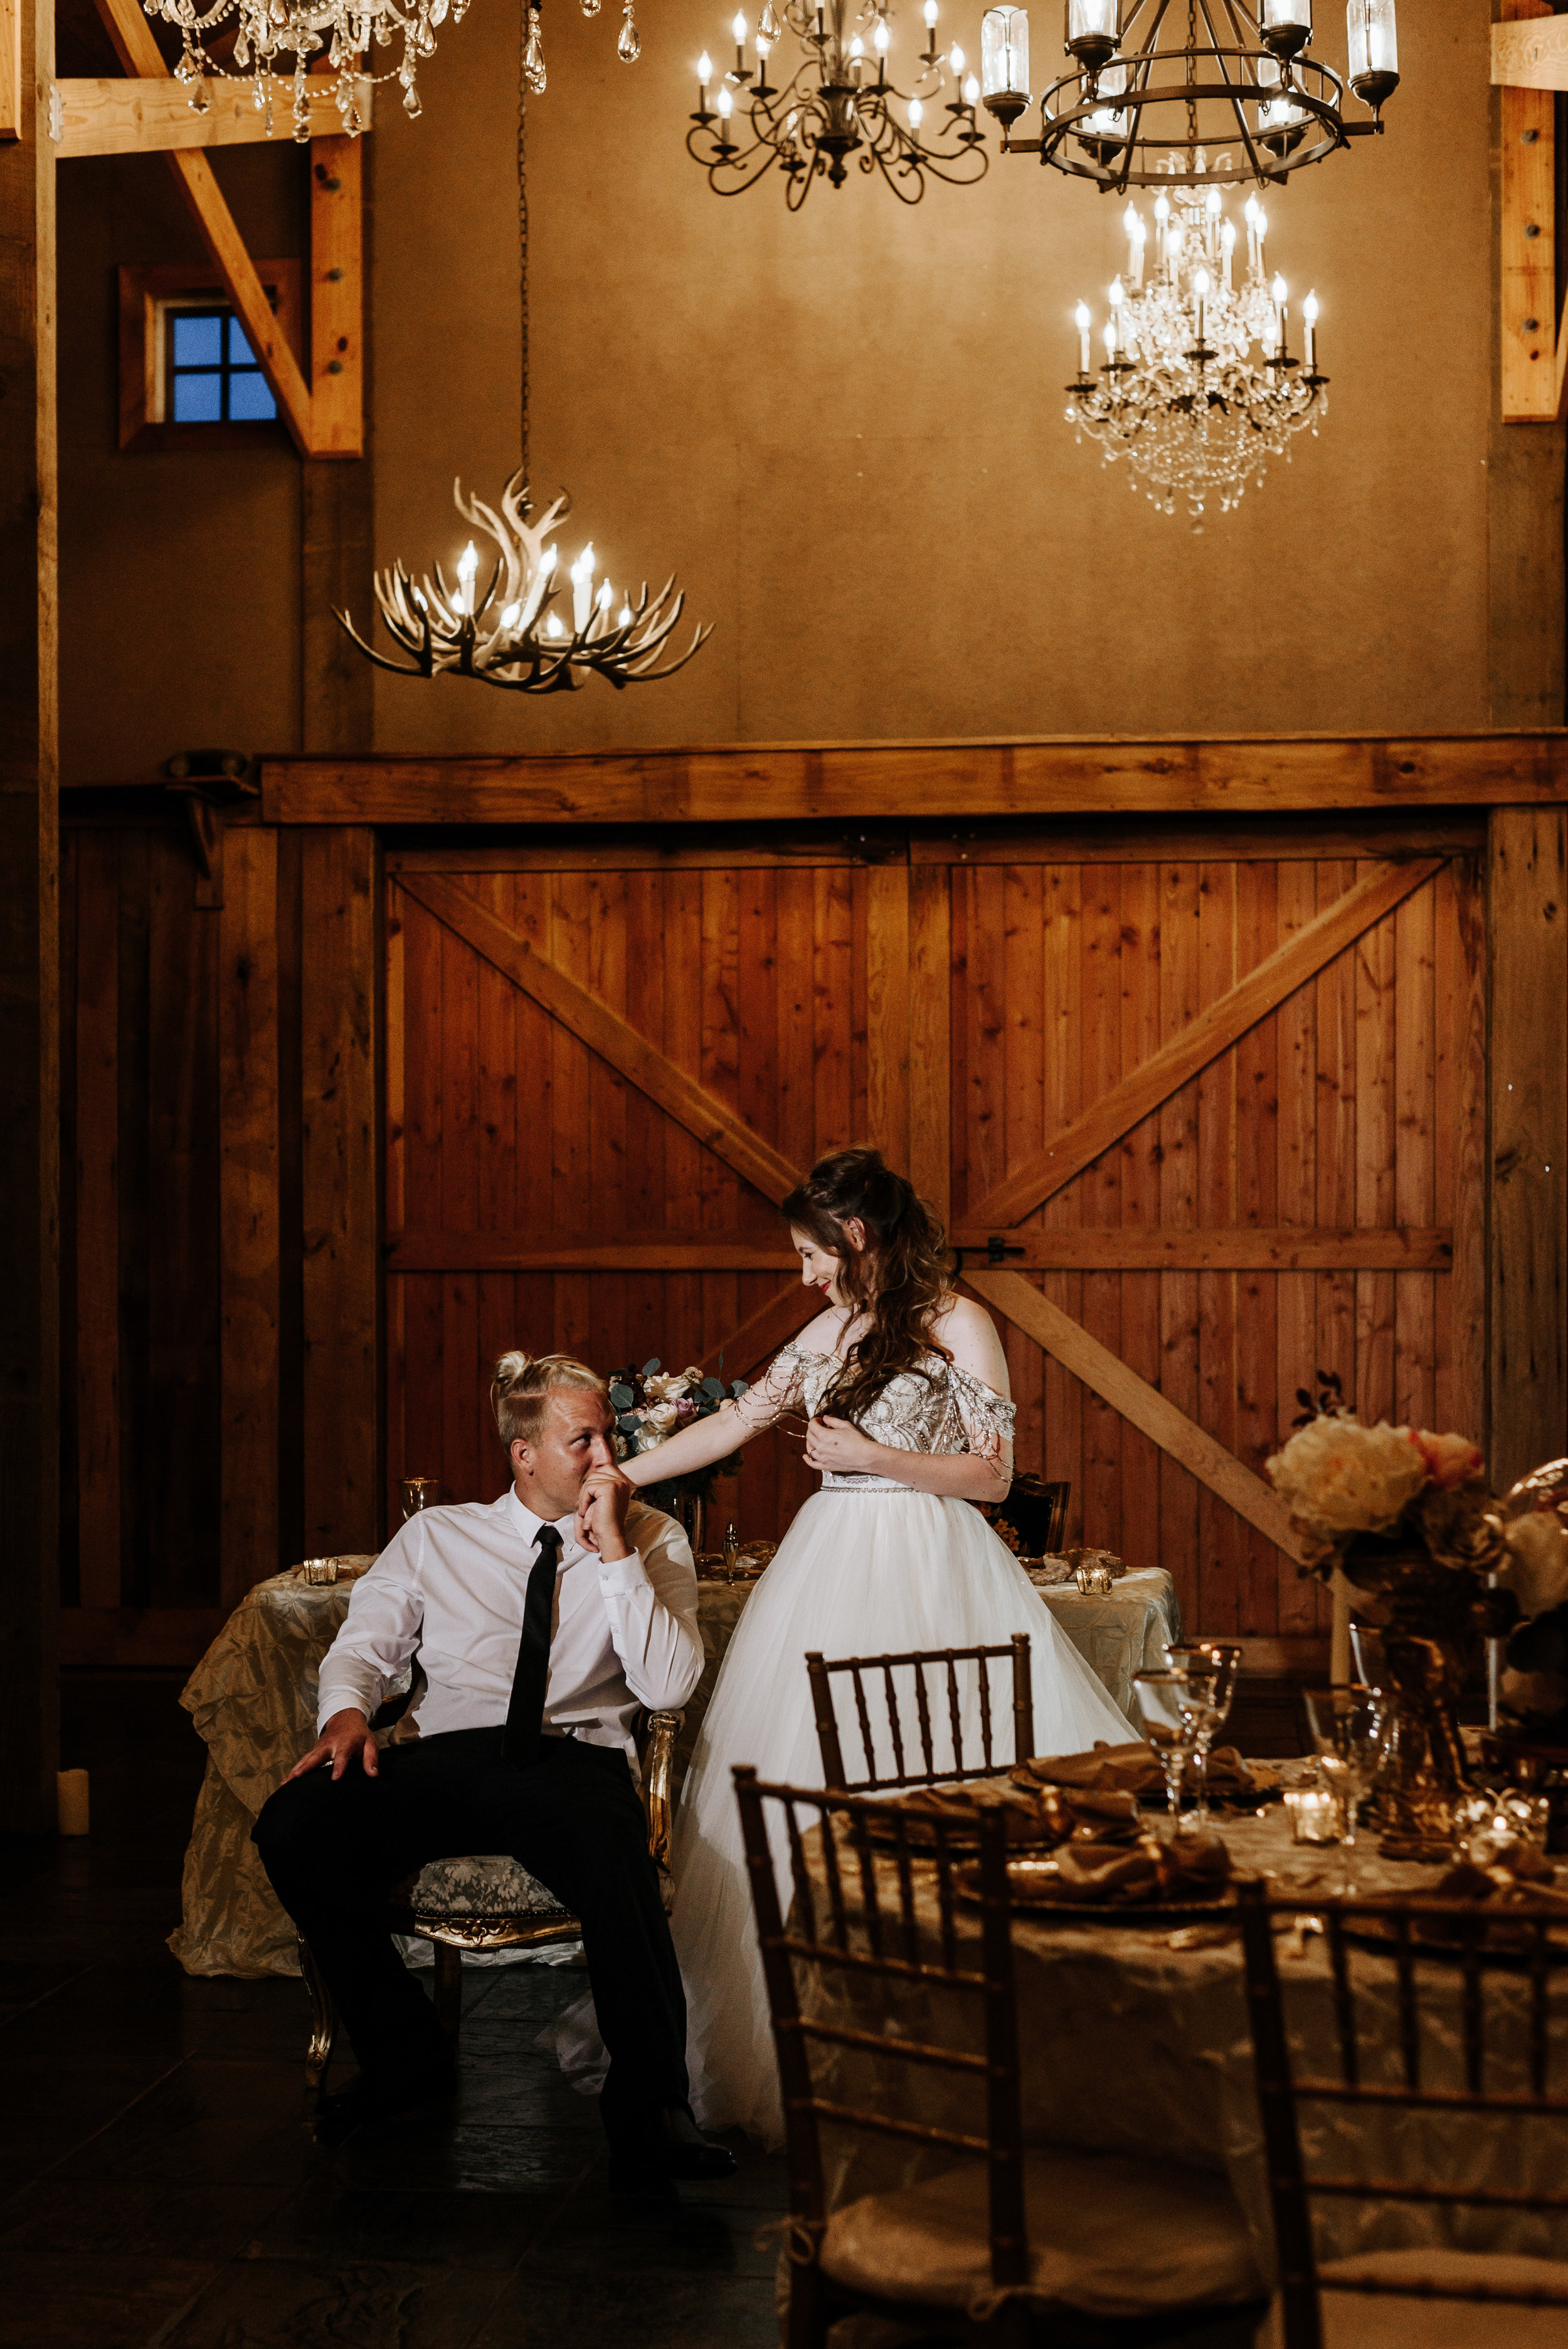 Grant-Station-Styled-Shoot-Whimsical-Moody-Fairytale-Wedding-Photography-by-V-3050.jpg